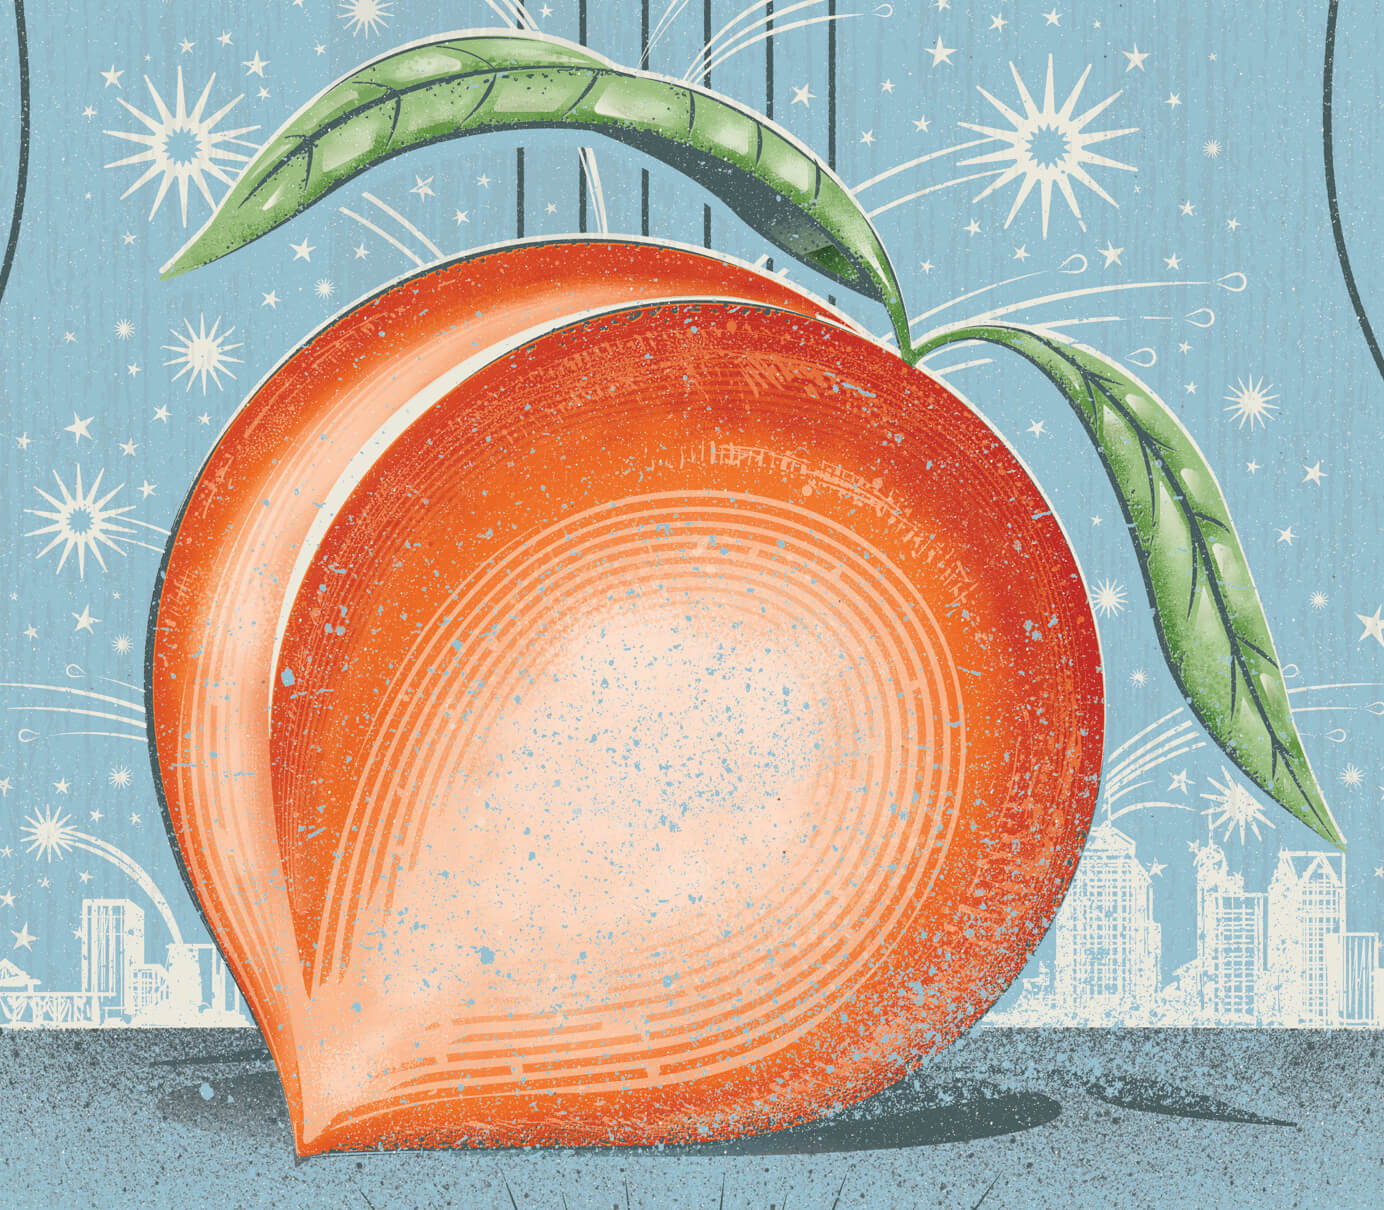 Detail image of Georgia Peach and skyline for Lady Antebellum poster design